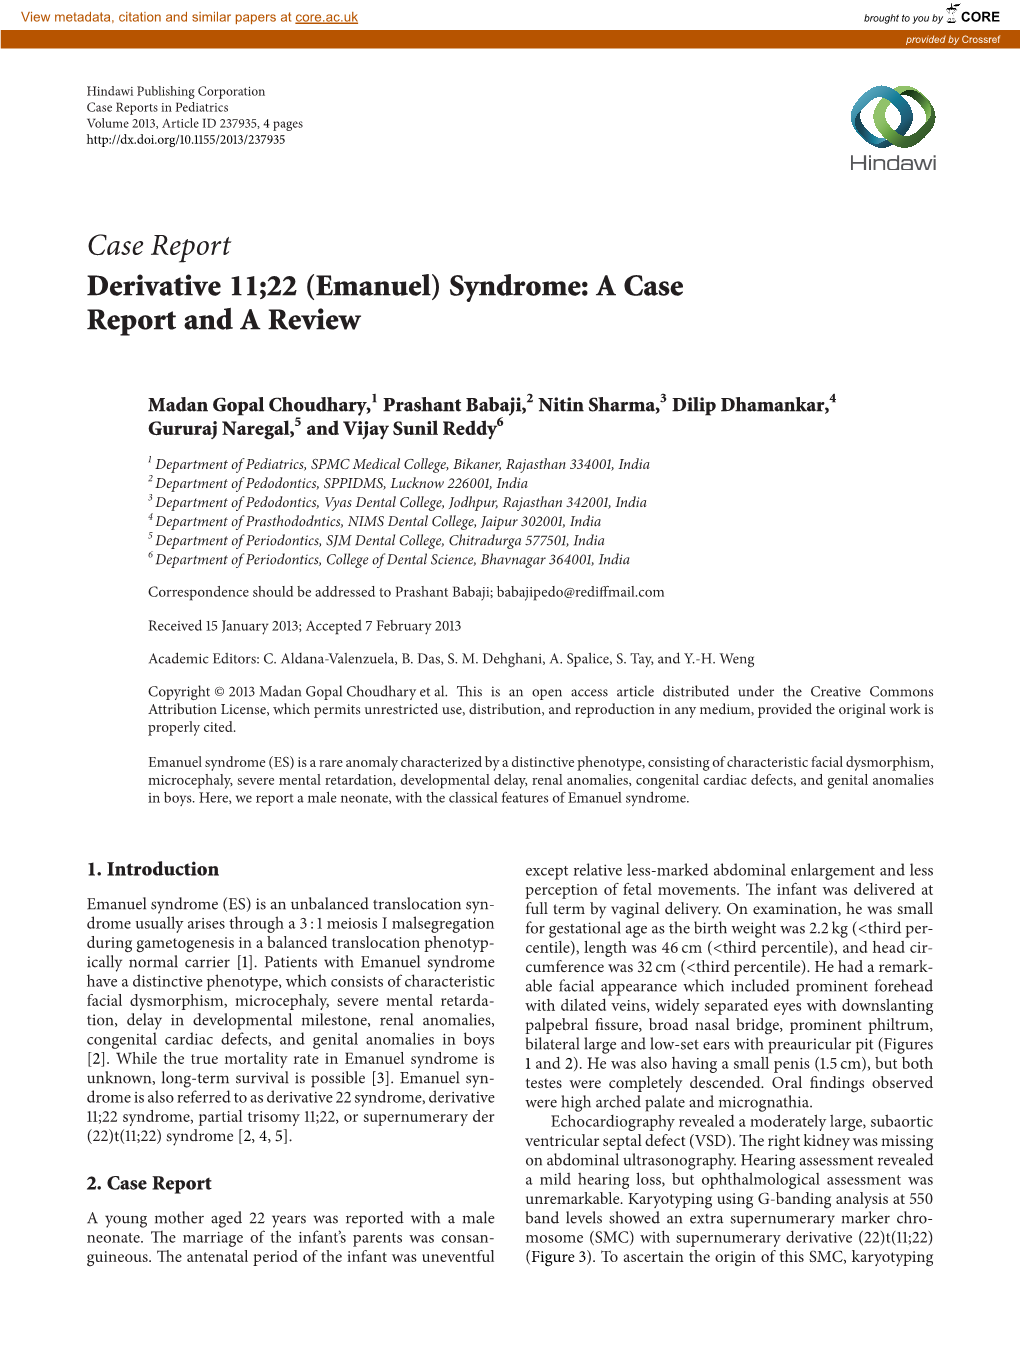 (Emanuel) Syndrome: a Case Report and a Review